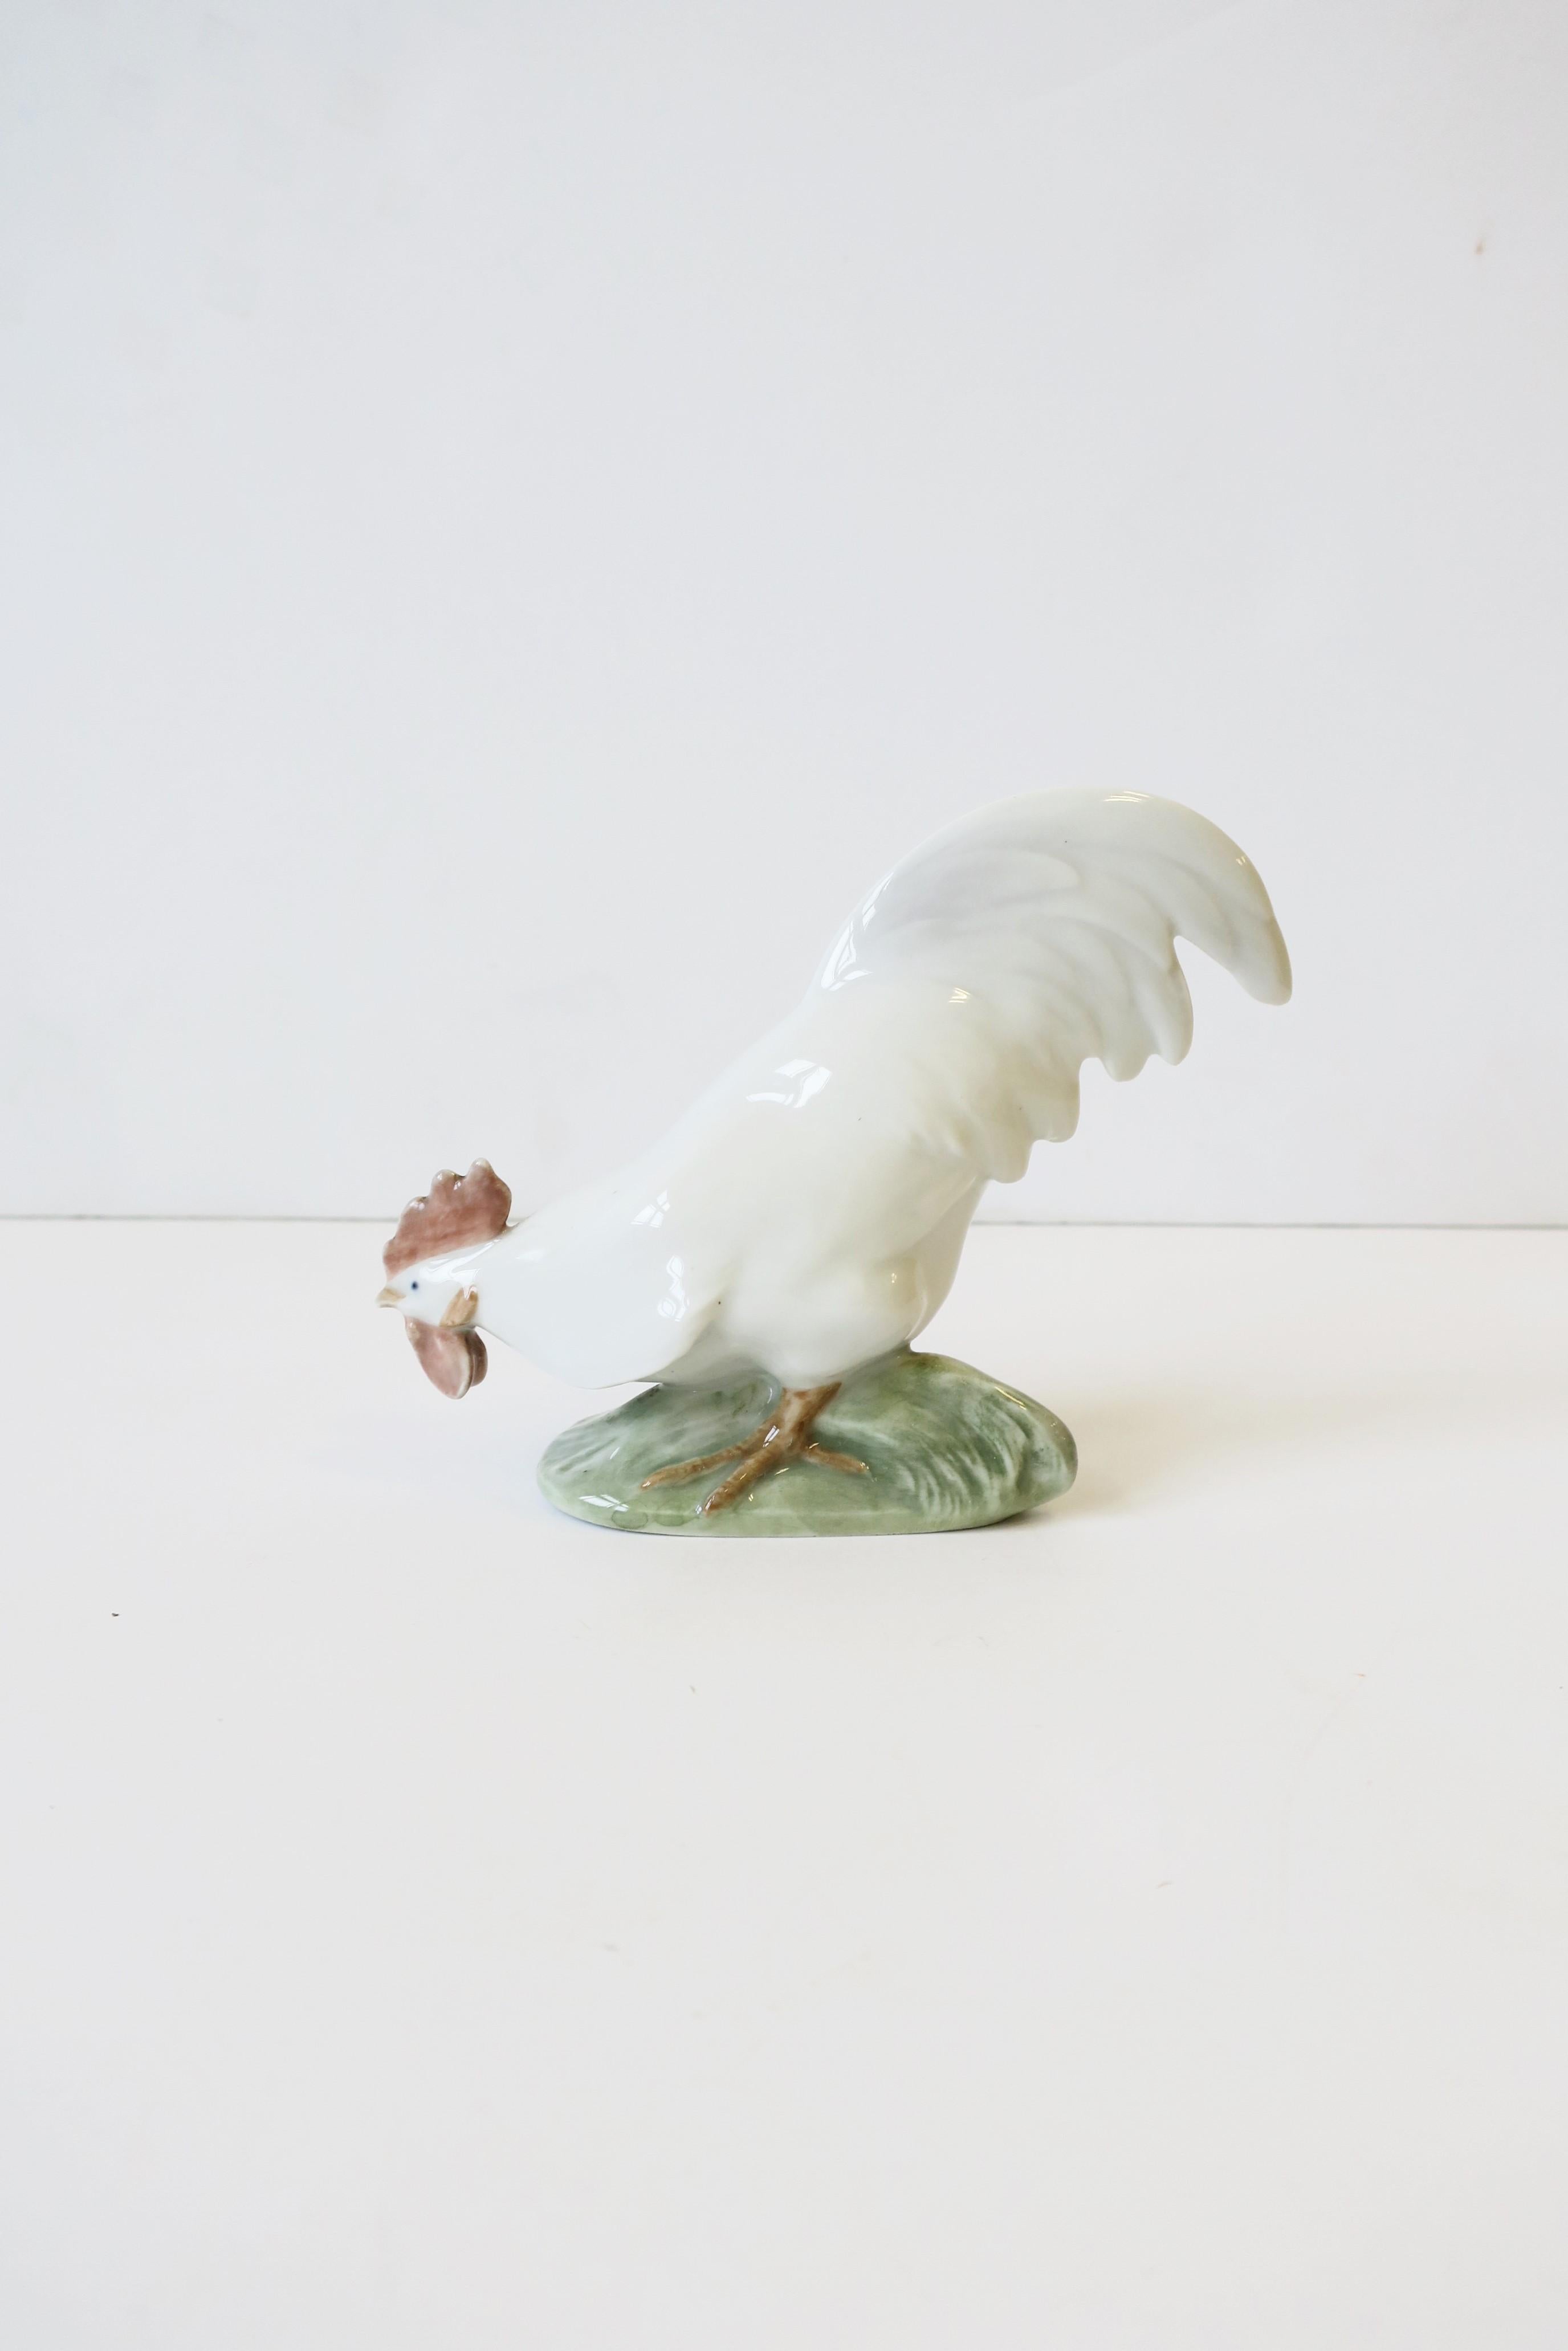 A porcelain rooster bird by Royal Copenhagen, Denmark, circa 20th century. With makers' mark and numbered on bottom as show in image #15. Dimensions: 1.5